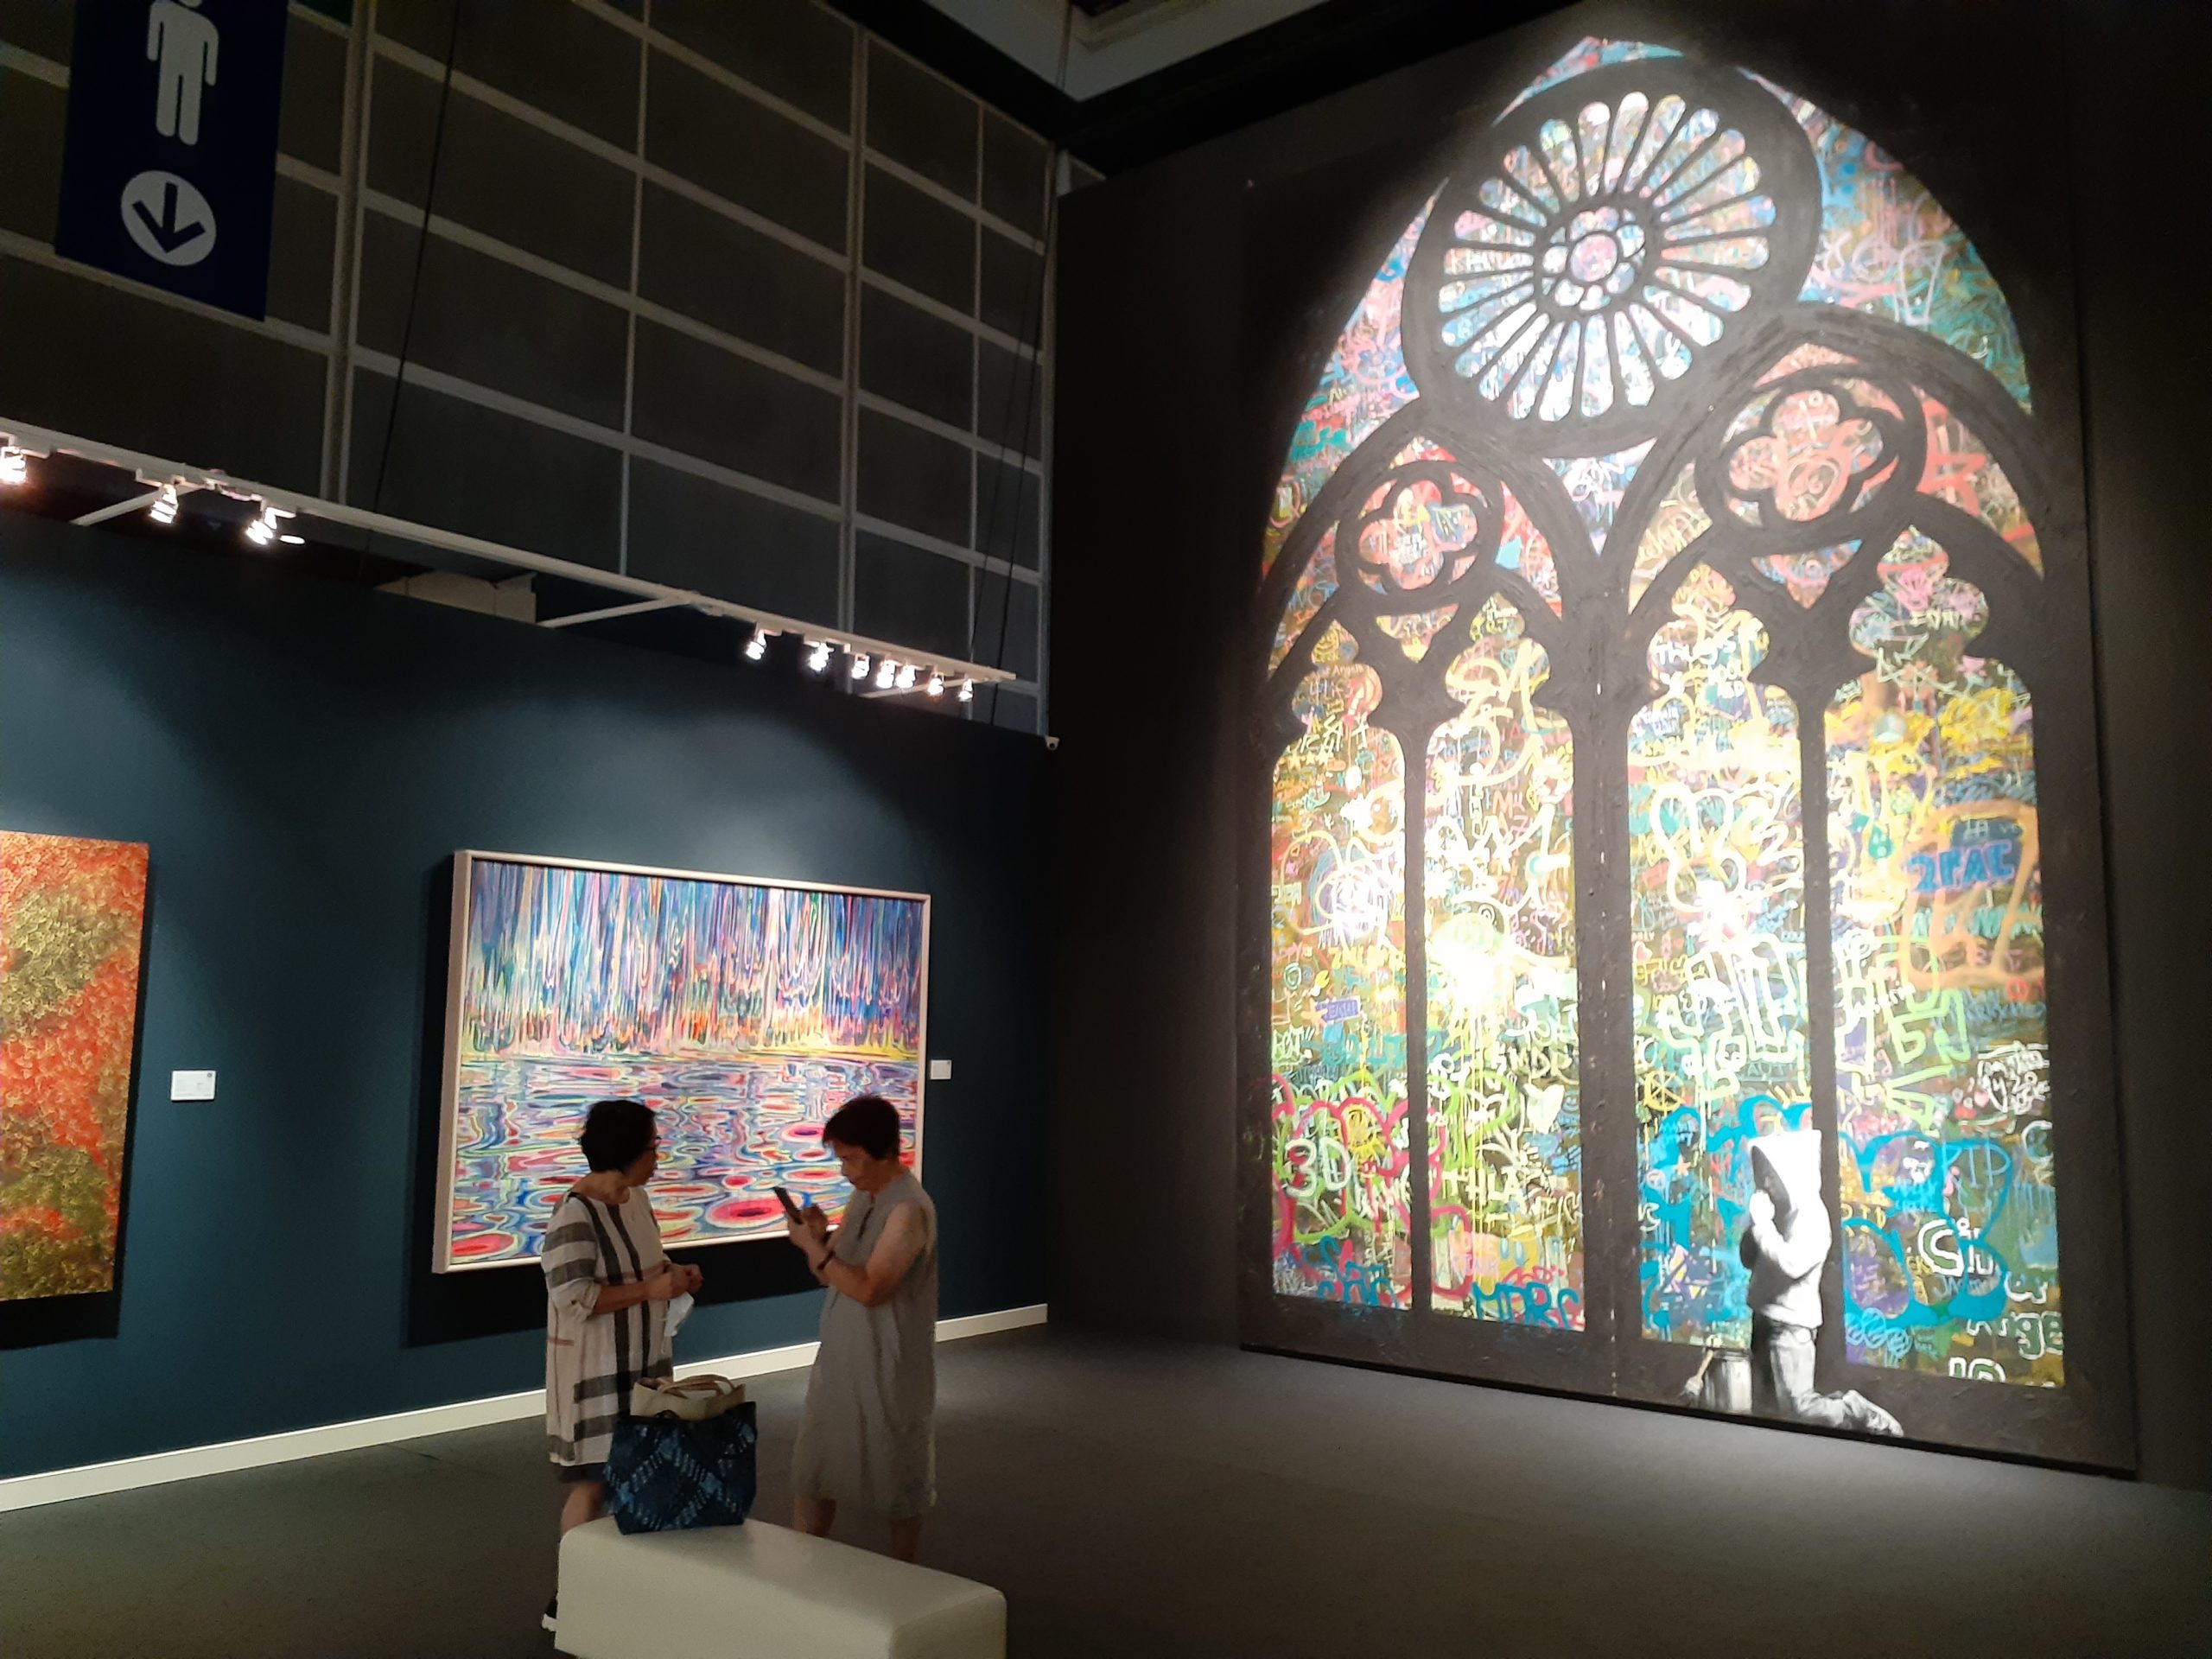 Banksy's monumental stained glass window – Forgive us our trespassing